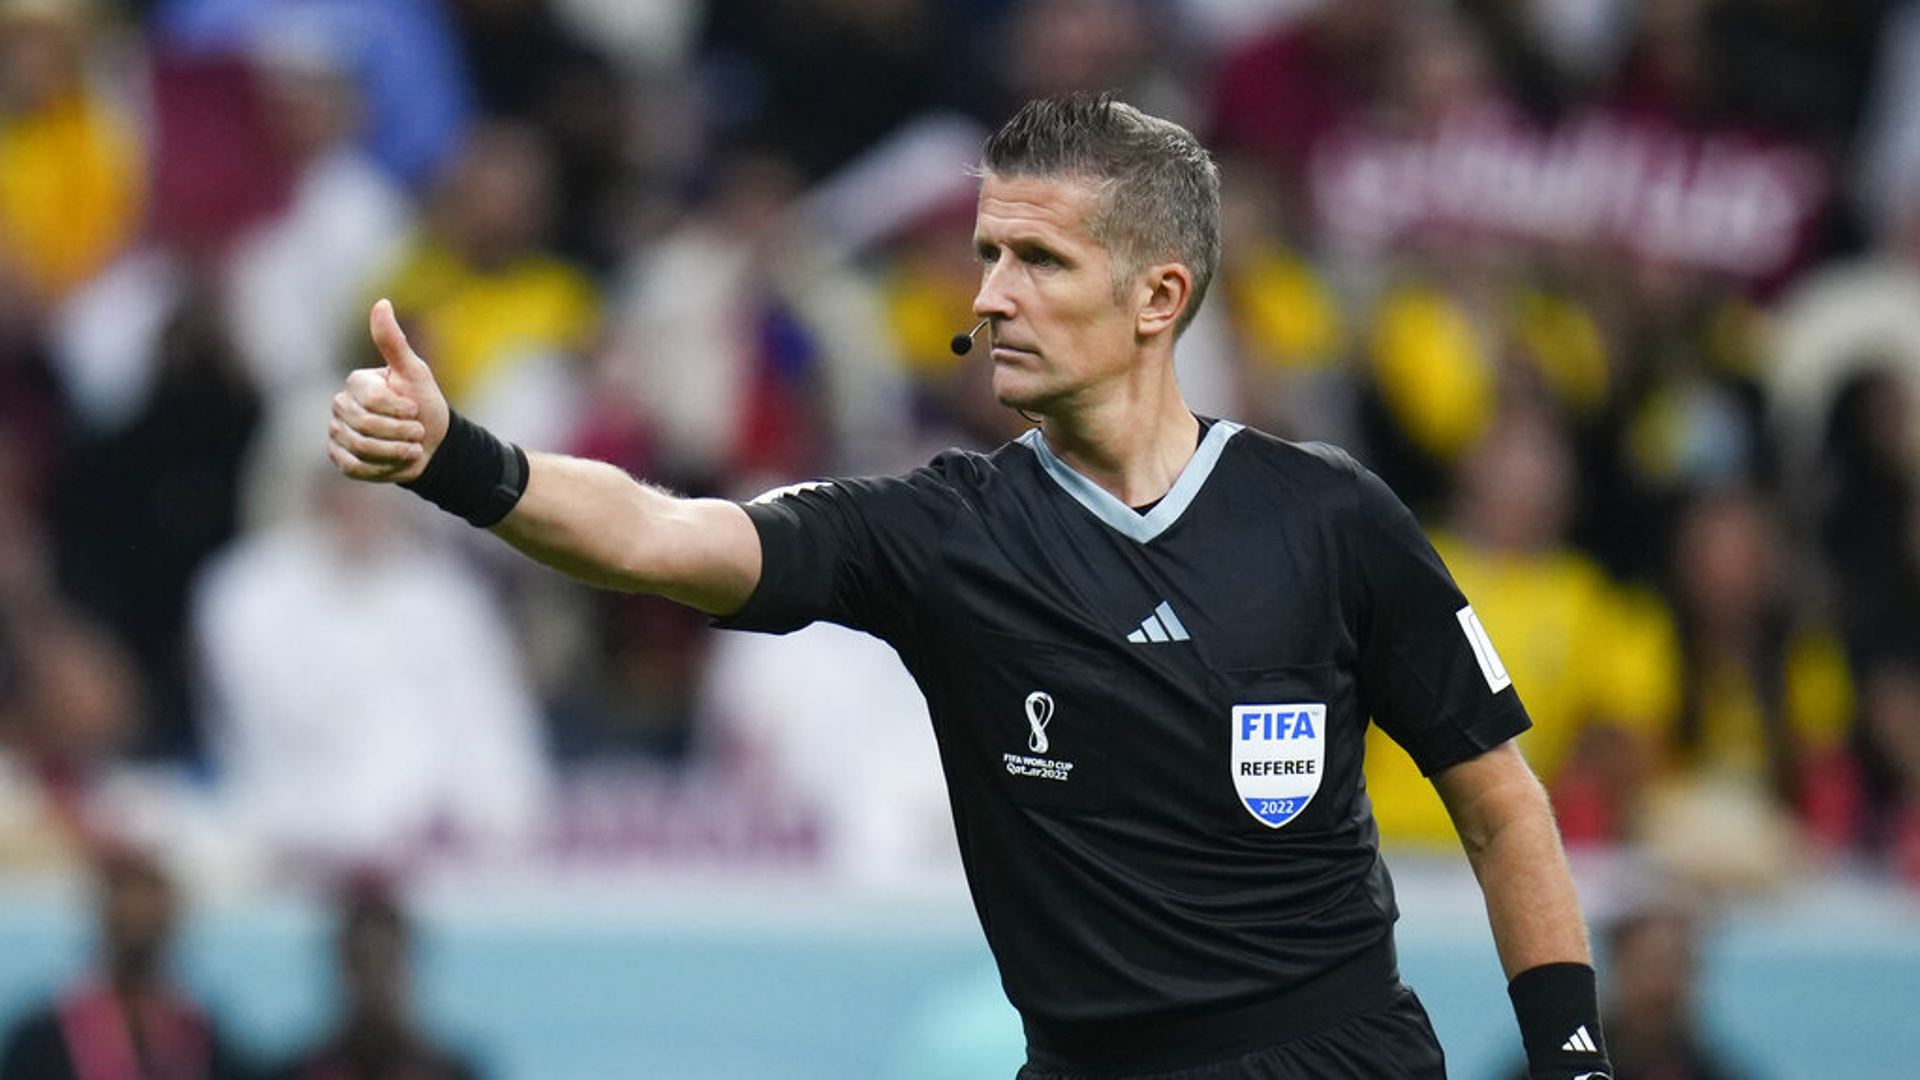 Daniele Orsato recognized as the best referee of the World Cup22 in